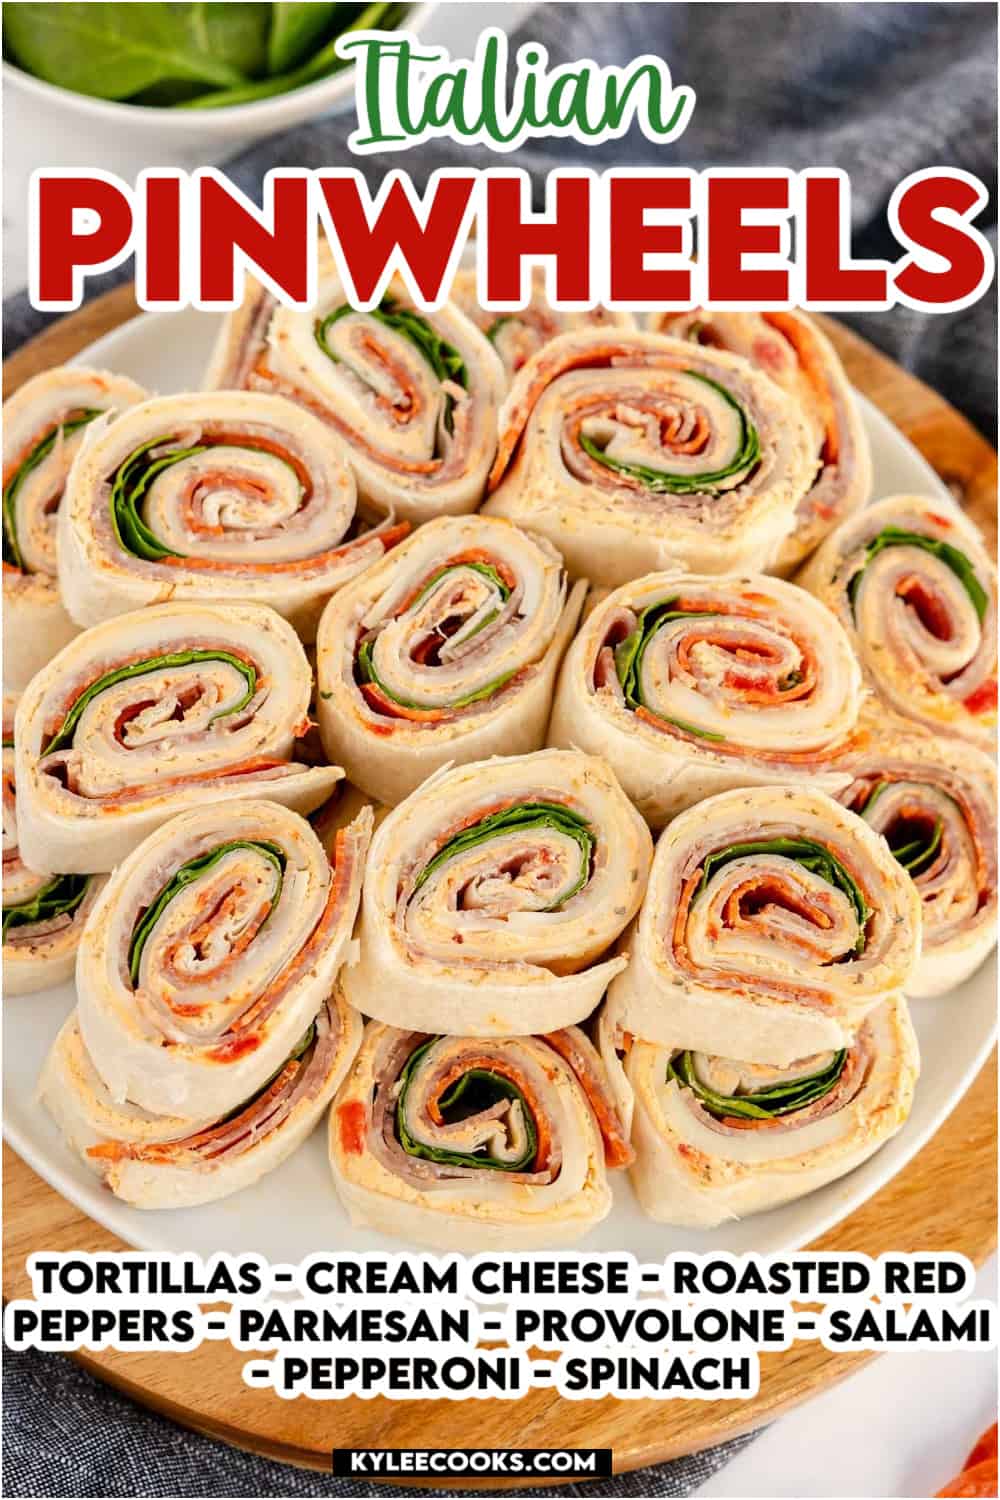 sliced italian pinwheels on a platter with recipe name and ingredients overlaid in text.